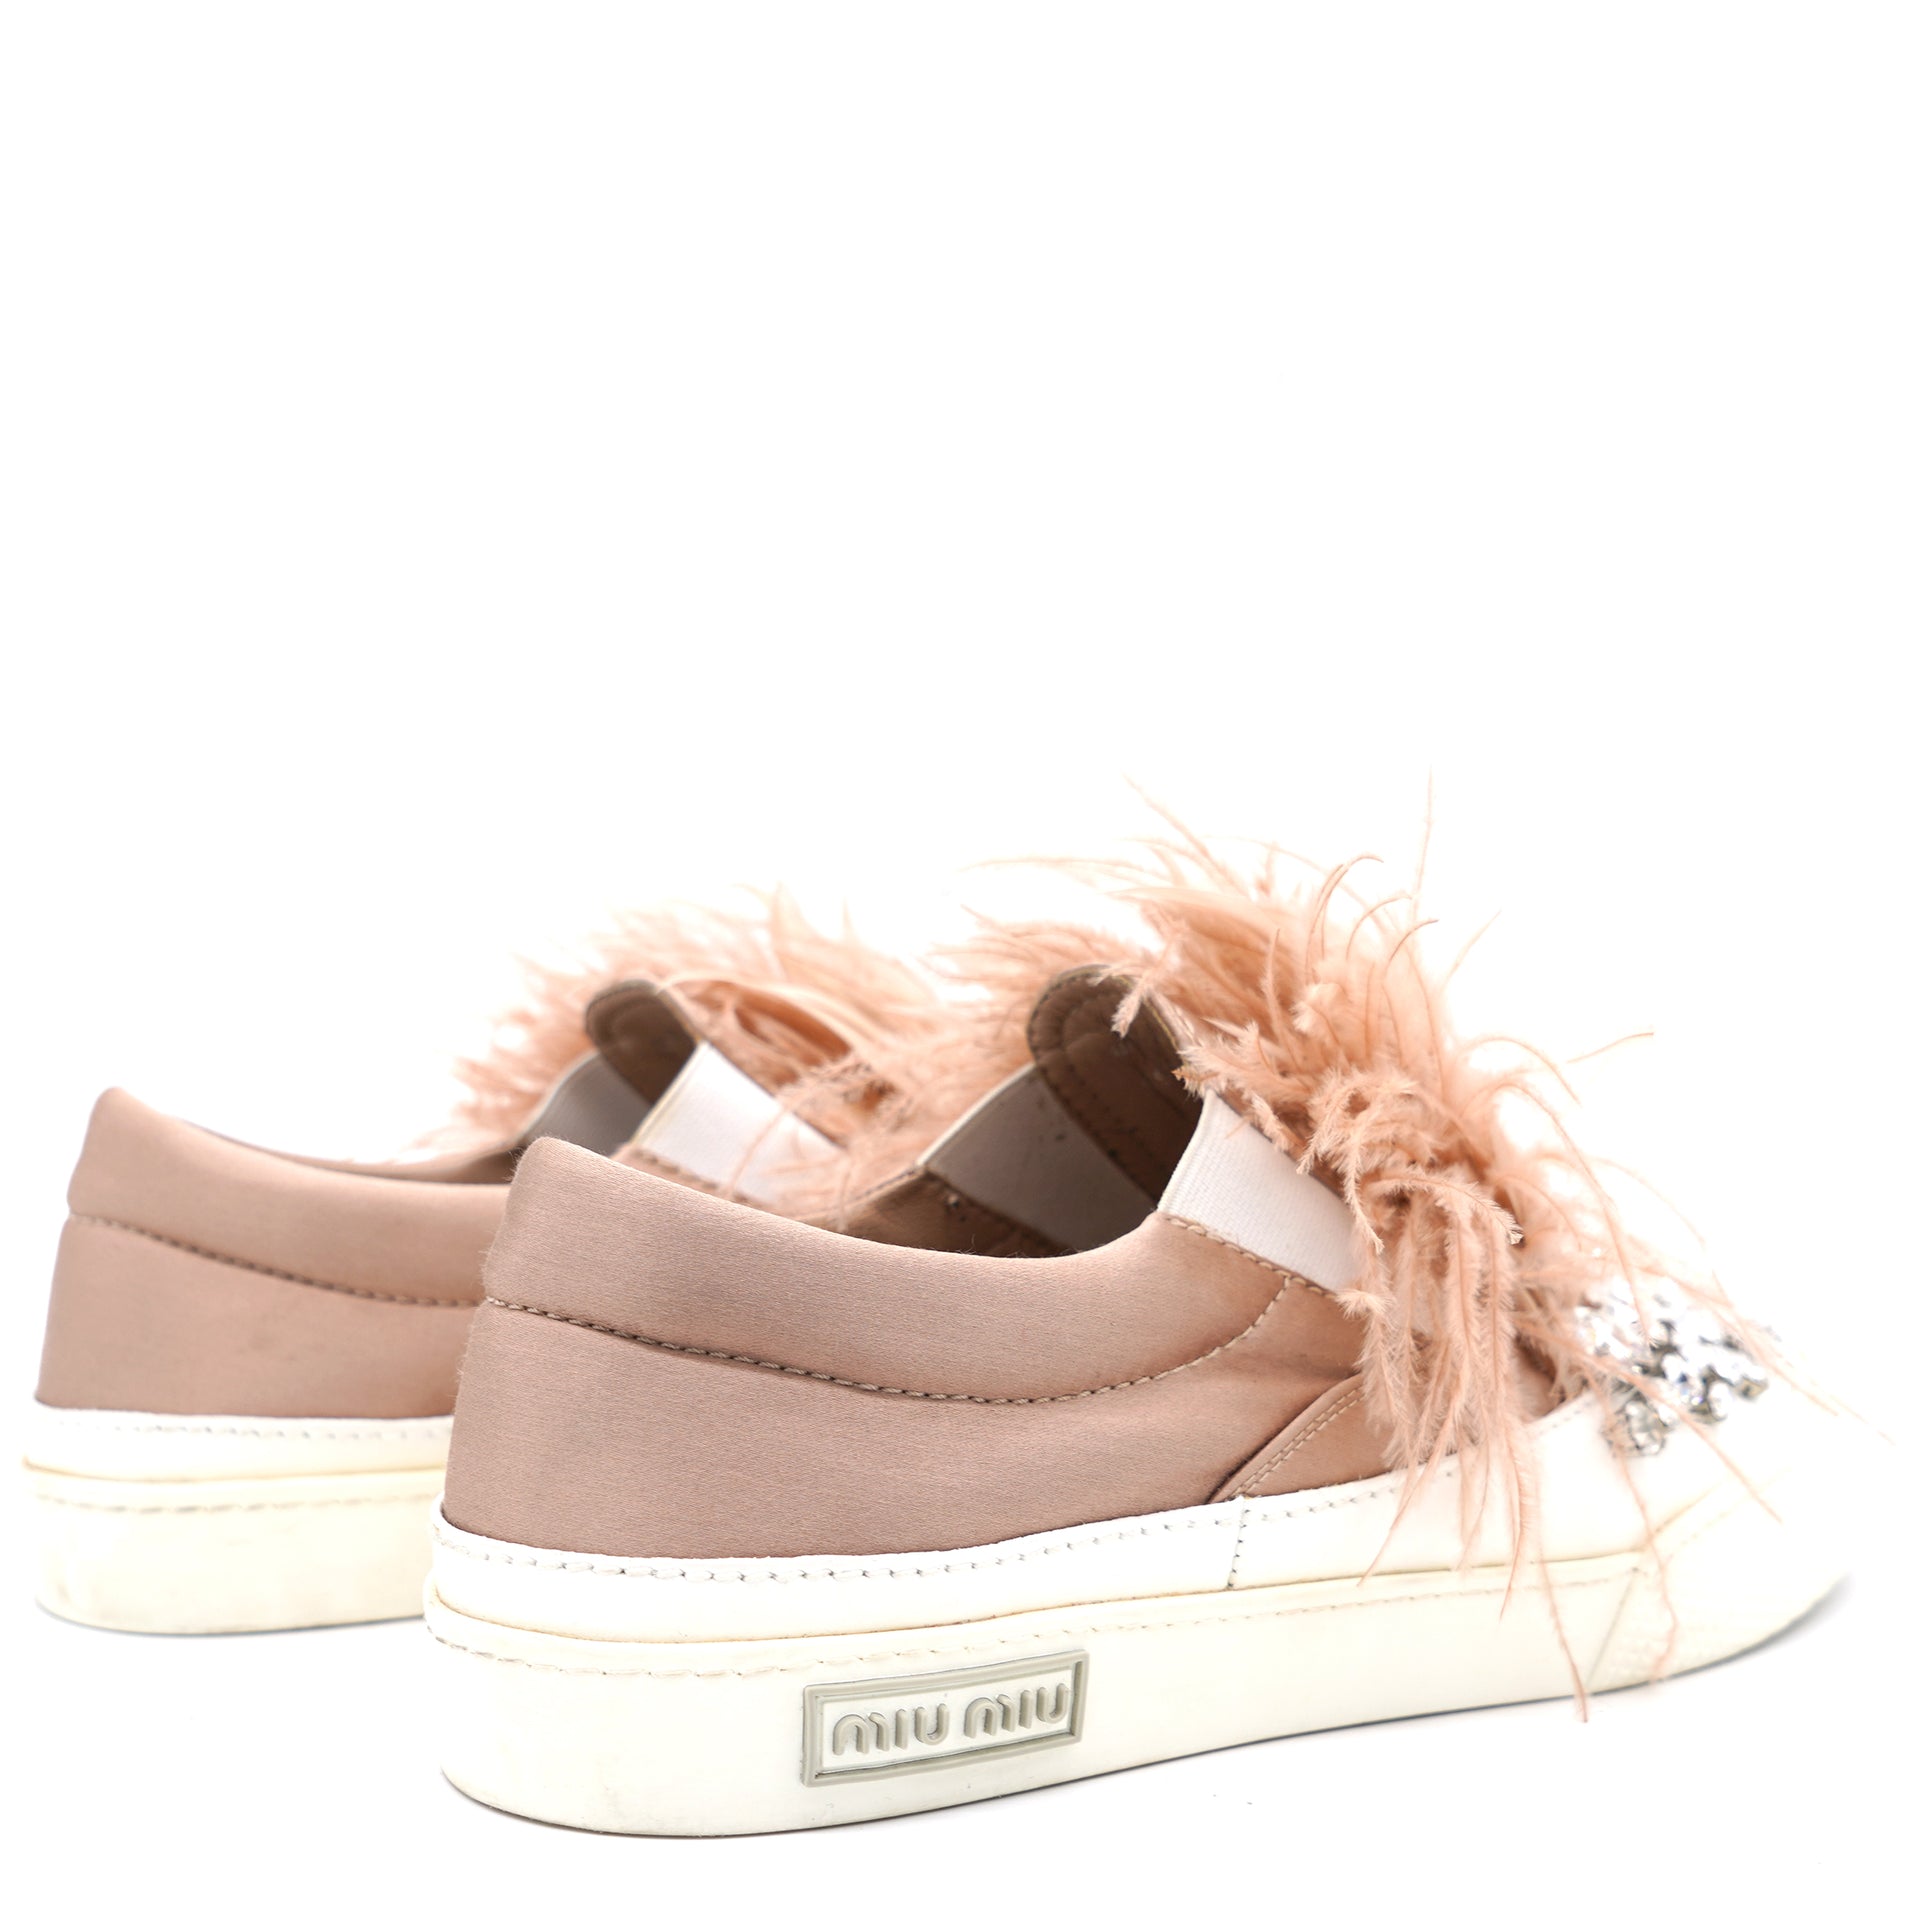 Pink Crystal Embellished Satin With Marabou Feathers Slip On Sneakers 37.5